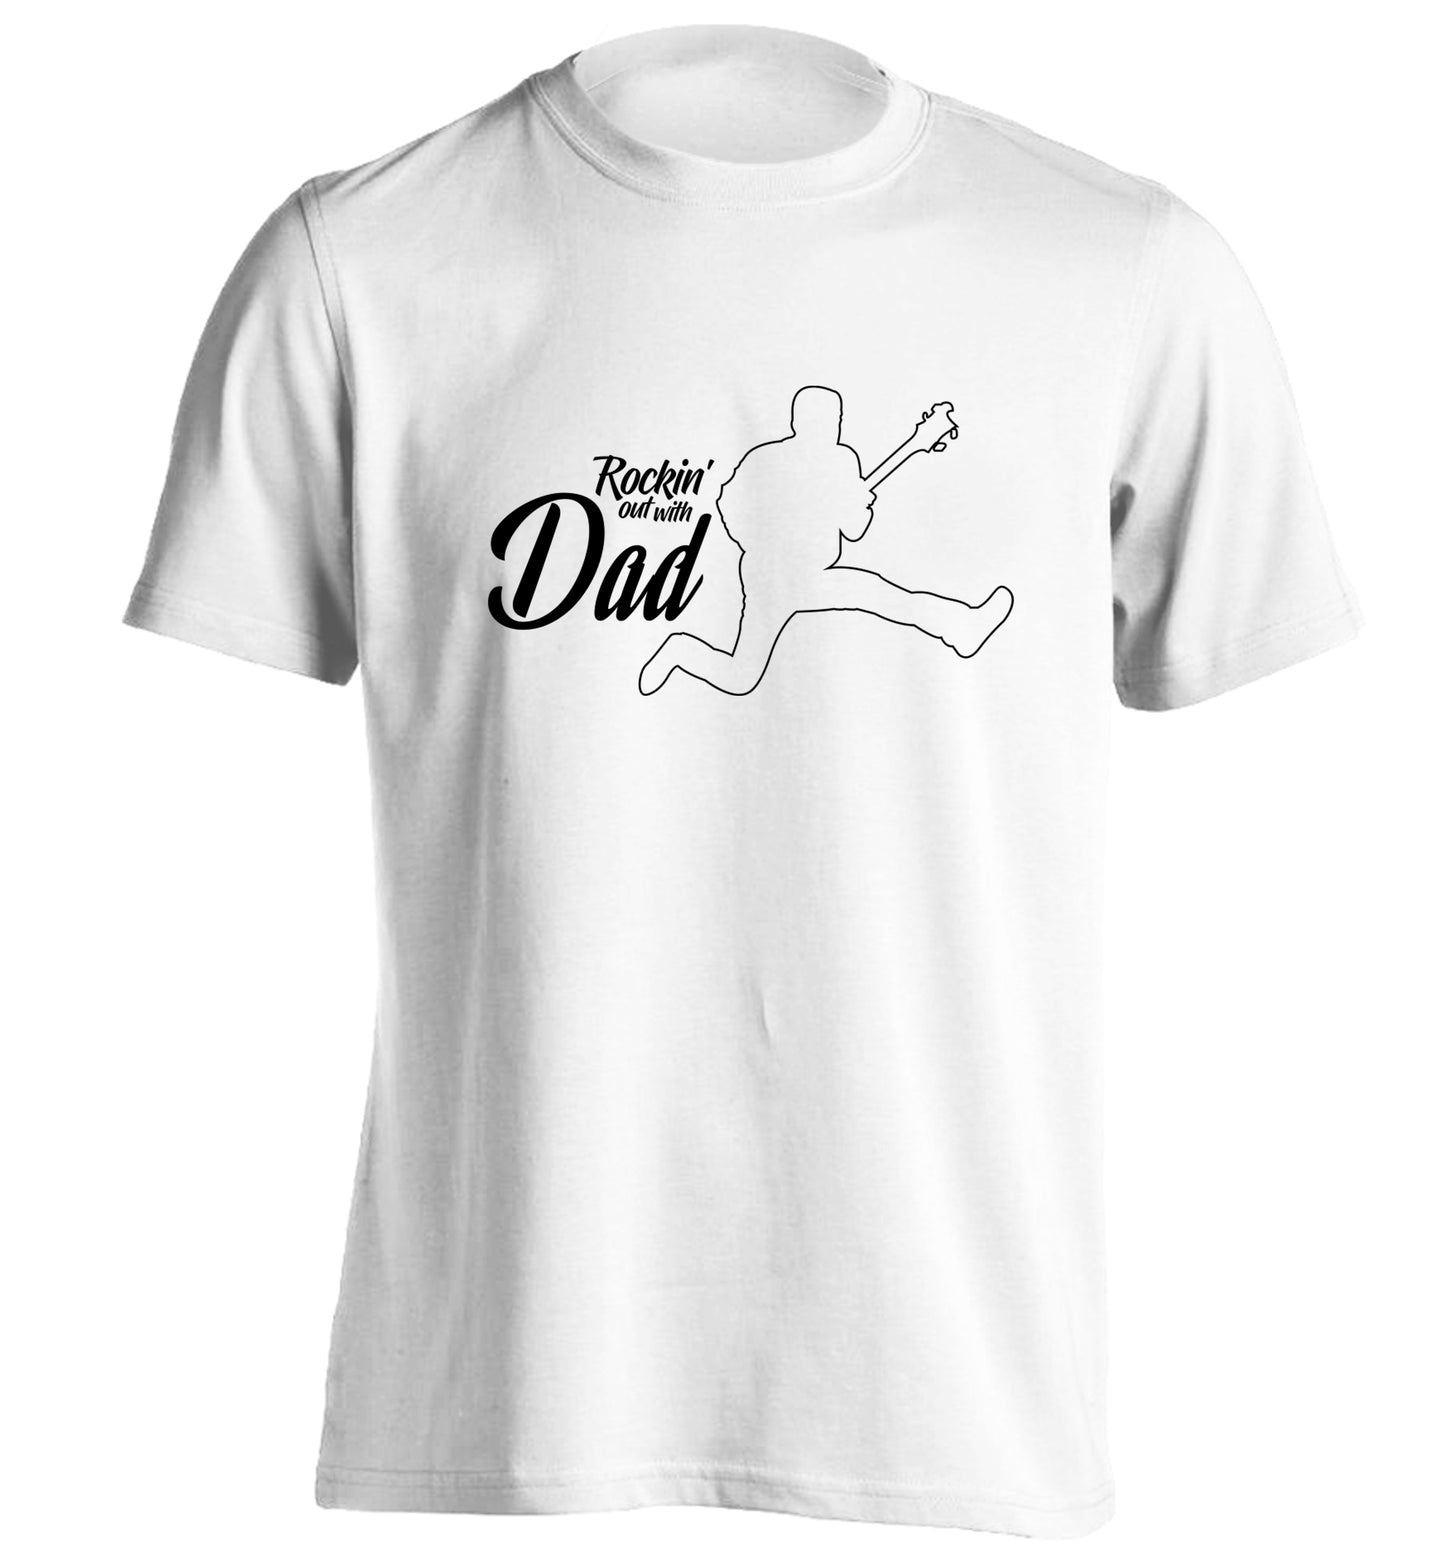 Rockin out with dad adults unisex white Tshirt 2XL